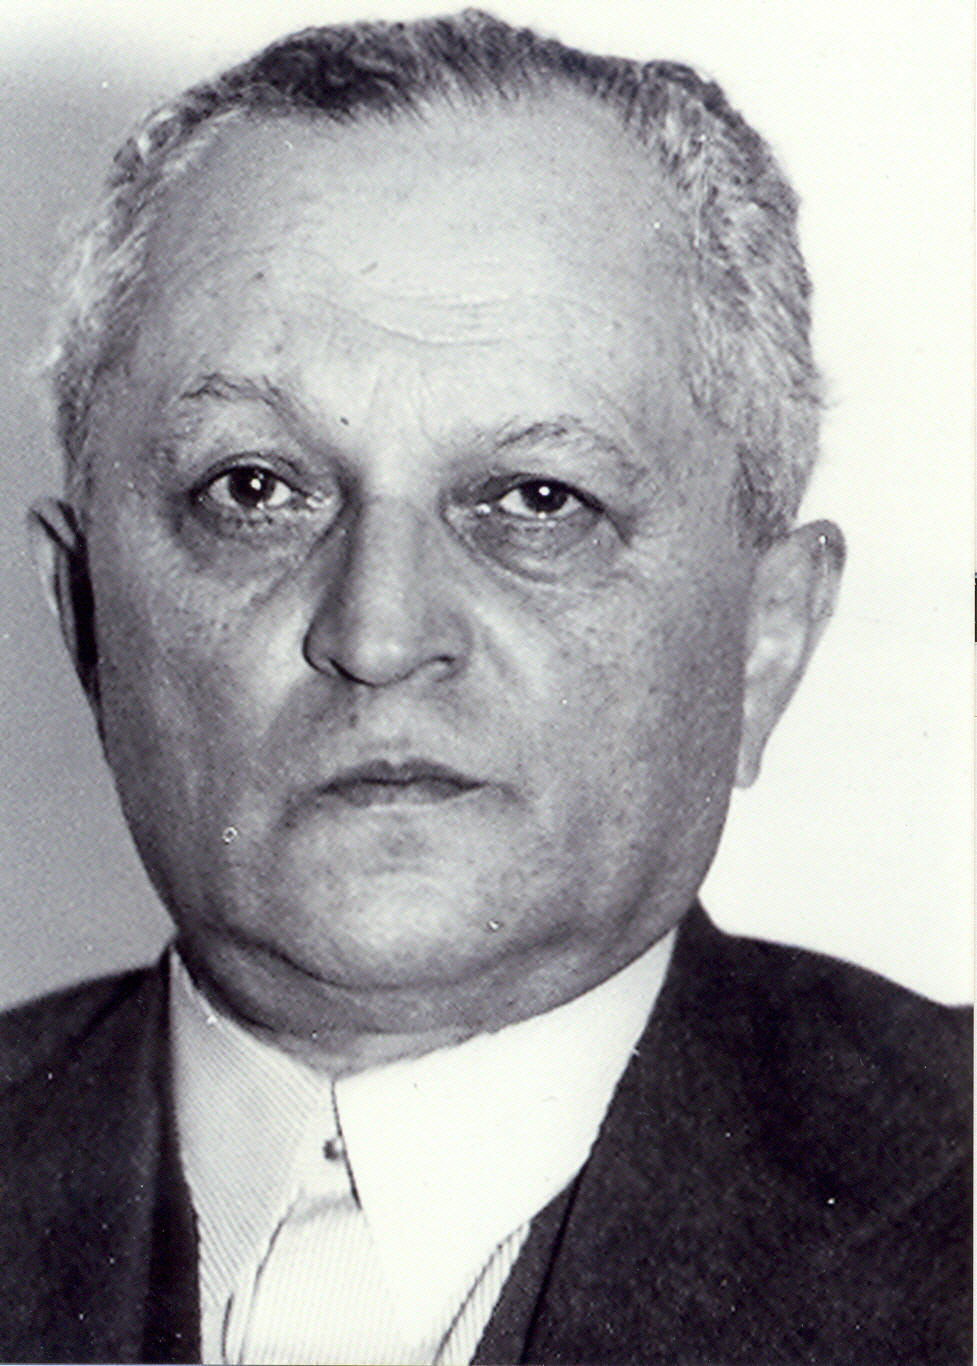 DR. JOSIP LAUFER, DISTINGUISHED ZAGREB LAWYER AND THE VICE PRESIDENT OF COMMITTEE FOR THE RESCUING OF JEWS ZAGREB JEWISH MUNICIPALITY IS LIQUIDATED TOGETHER WITH HIS FATHER AND HIS WIFE IN THE JASENOVAC 1942